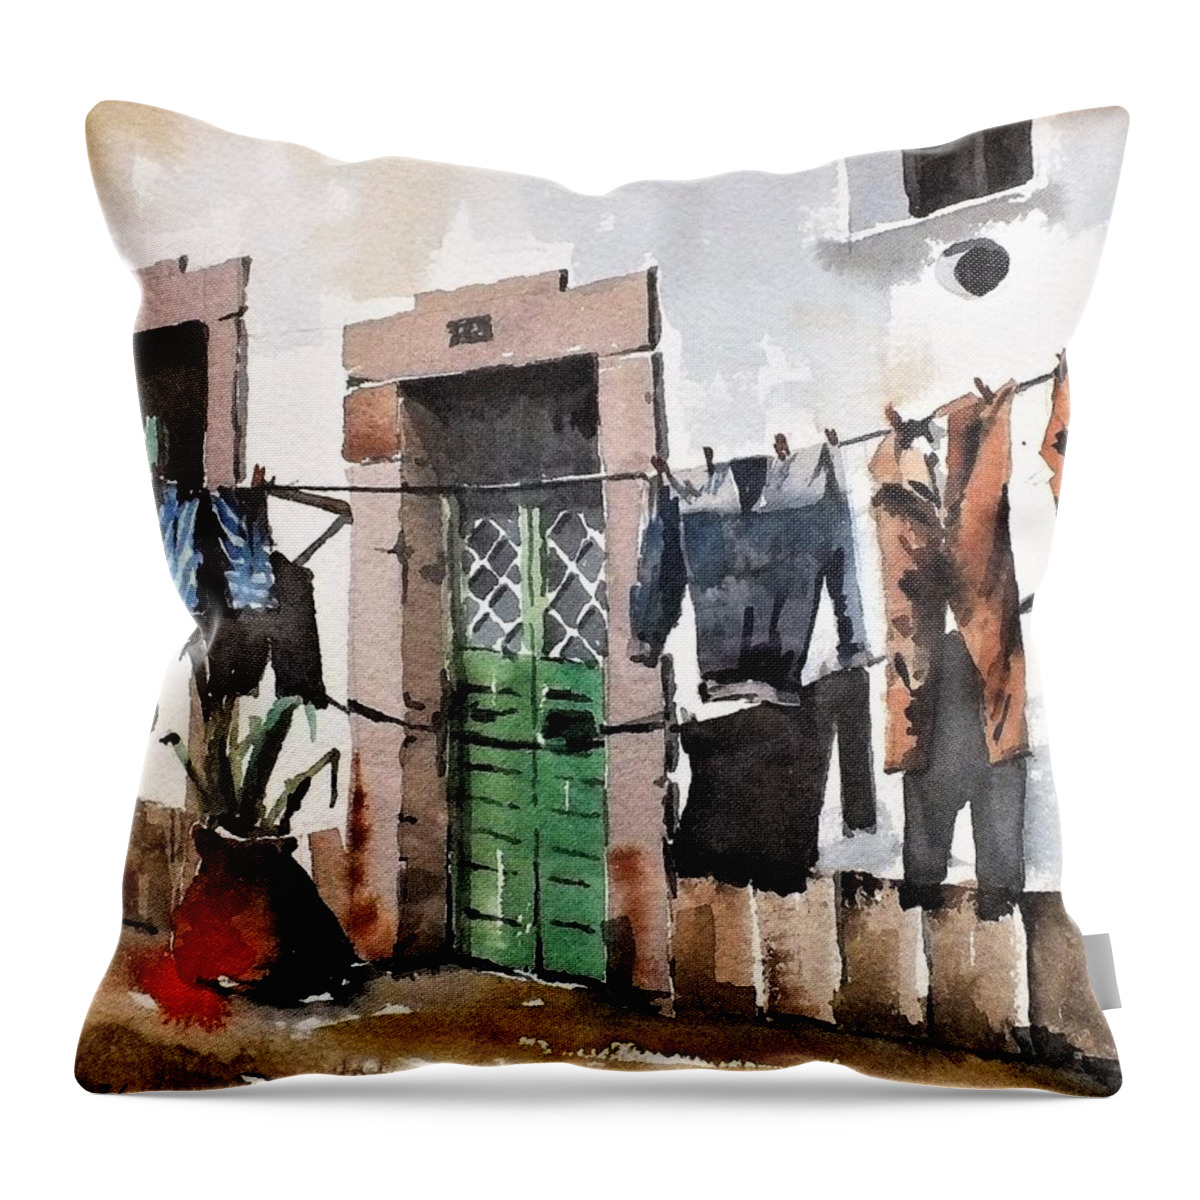 Luule House Pretending To Be A Washing Line ! Portugal Throw Pillow featuring the painting Washing Line in Luule, Portugal by Val Byrne